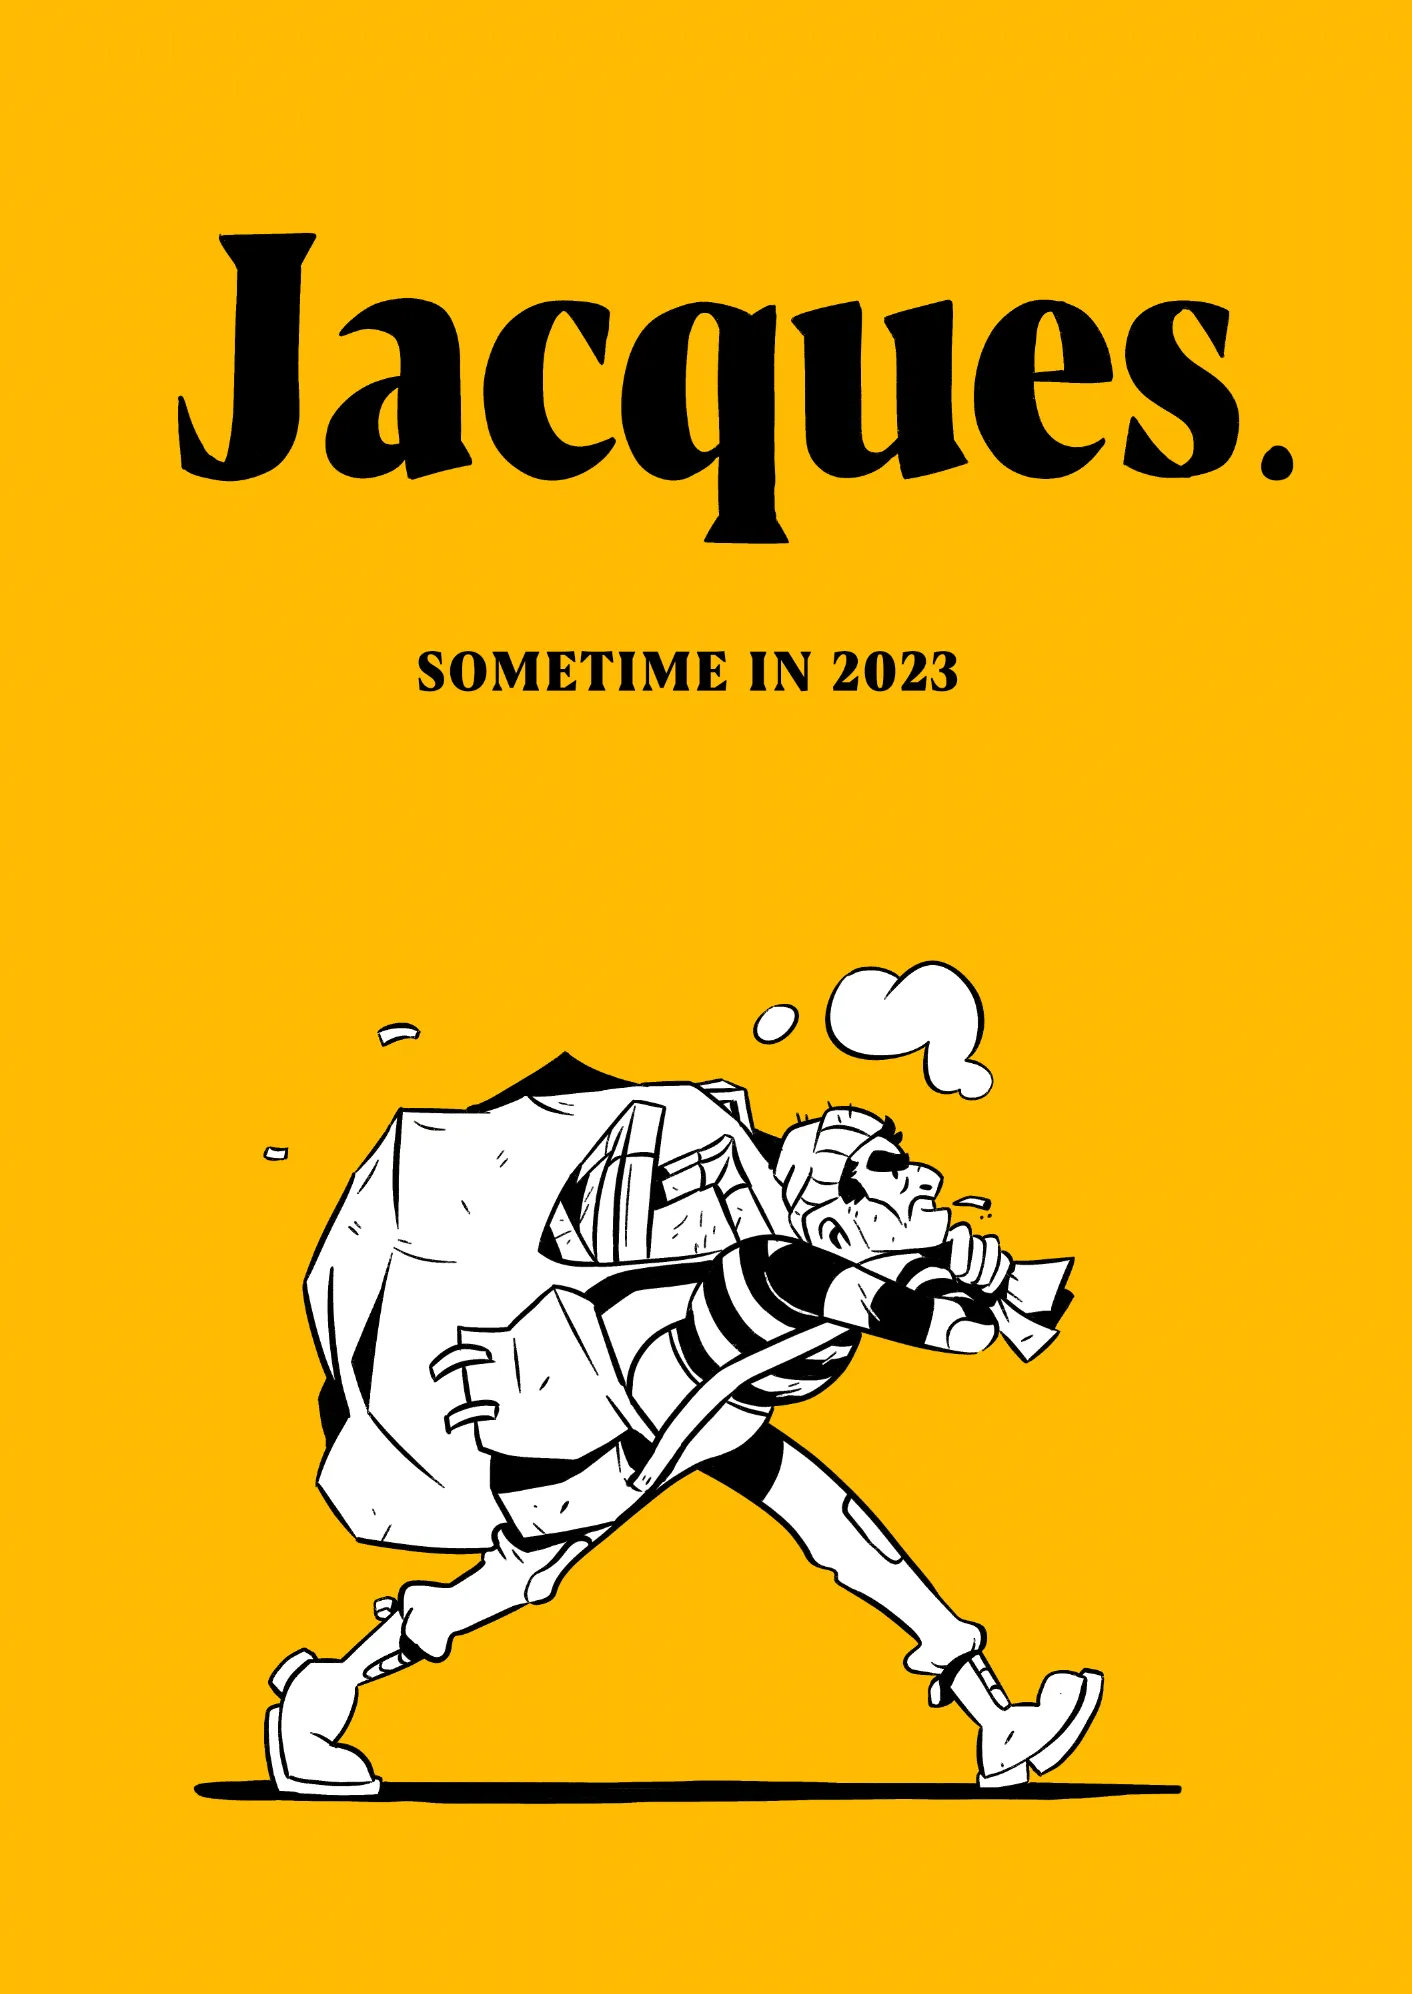 The temporary front cover for the comic book jacques